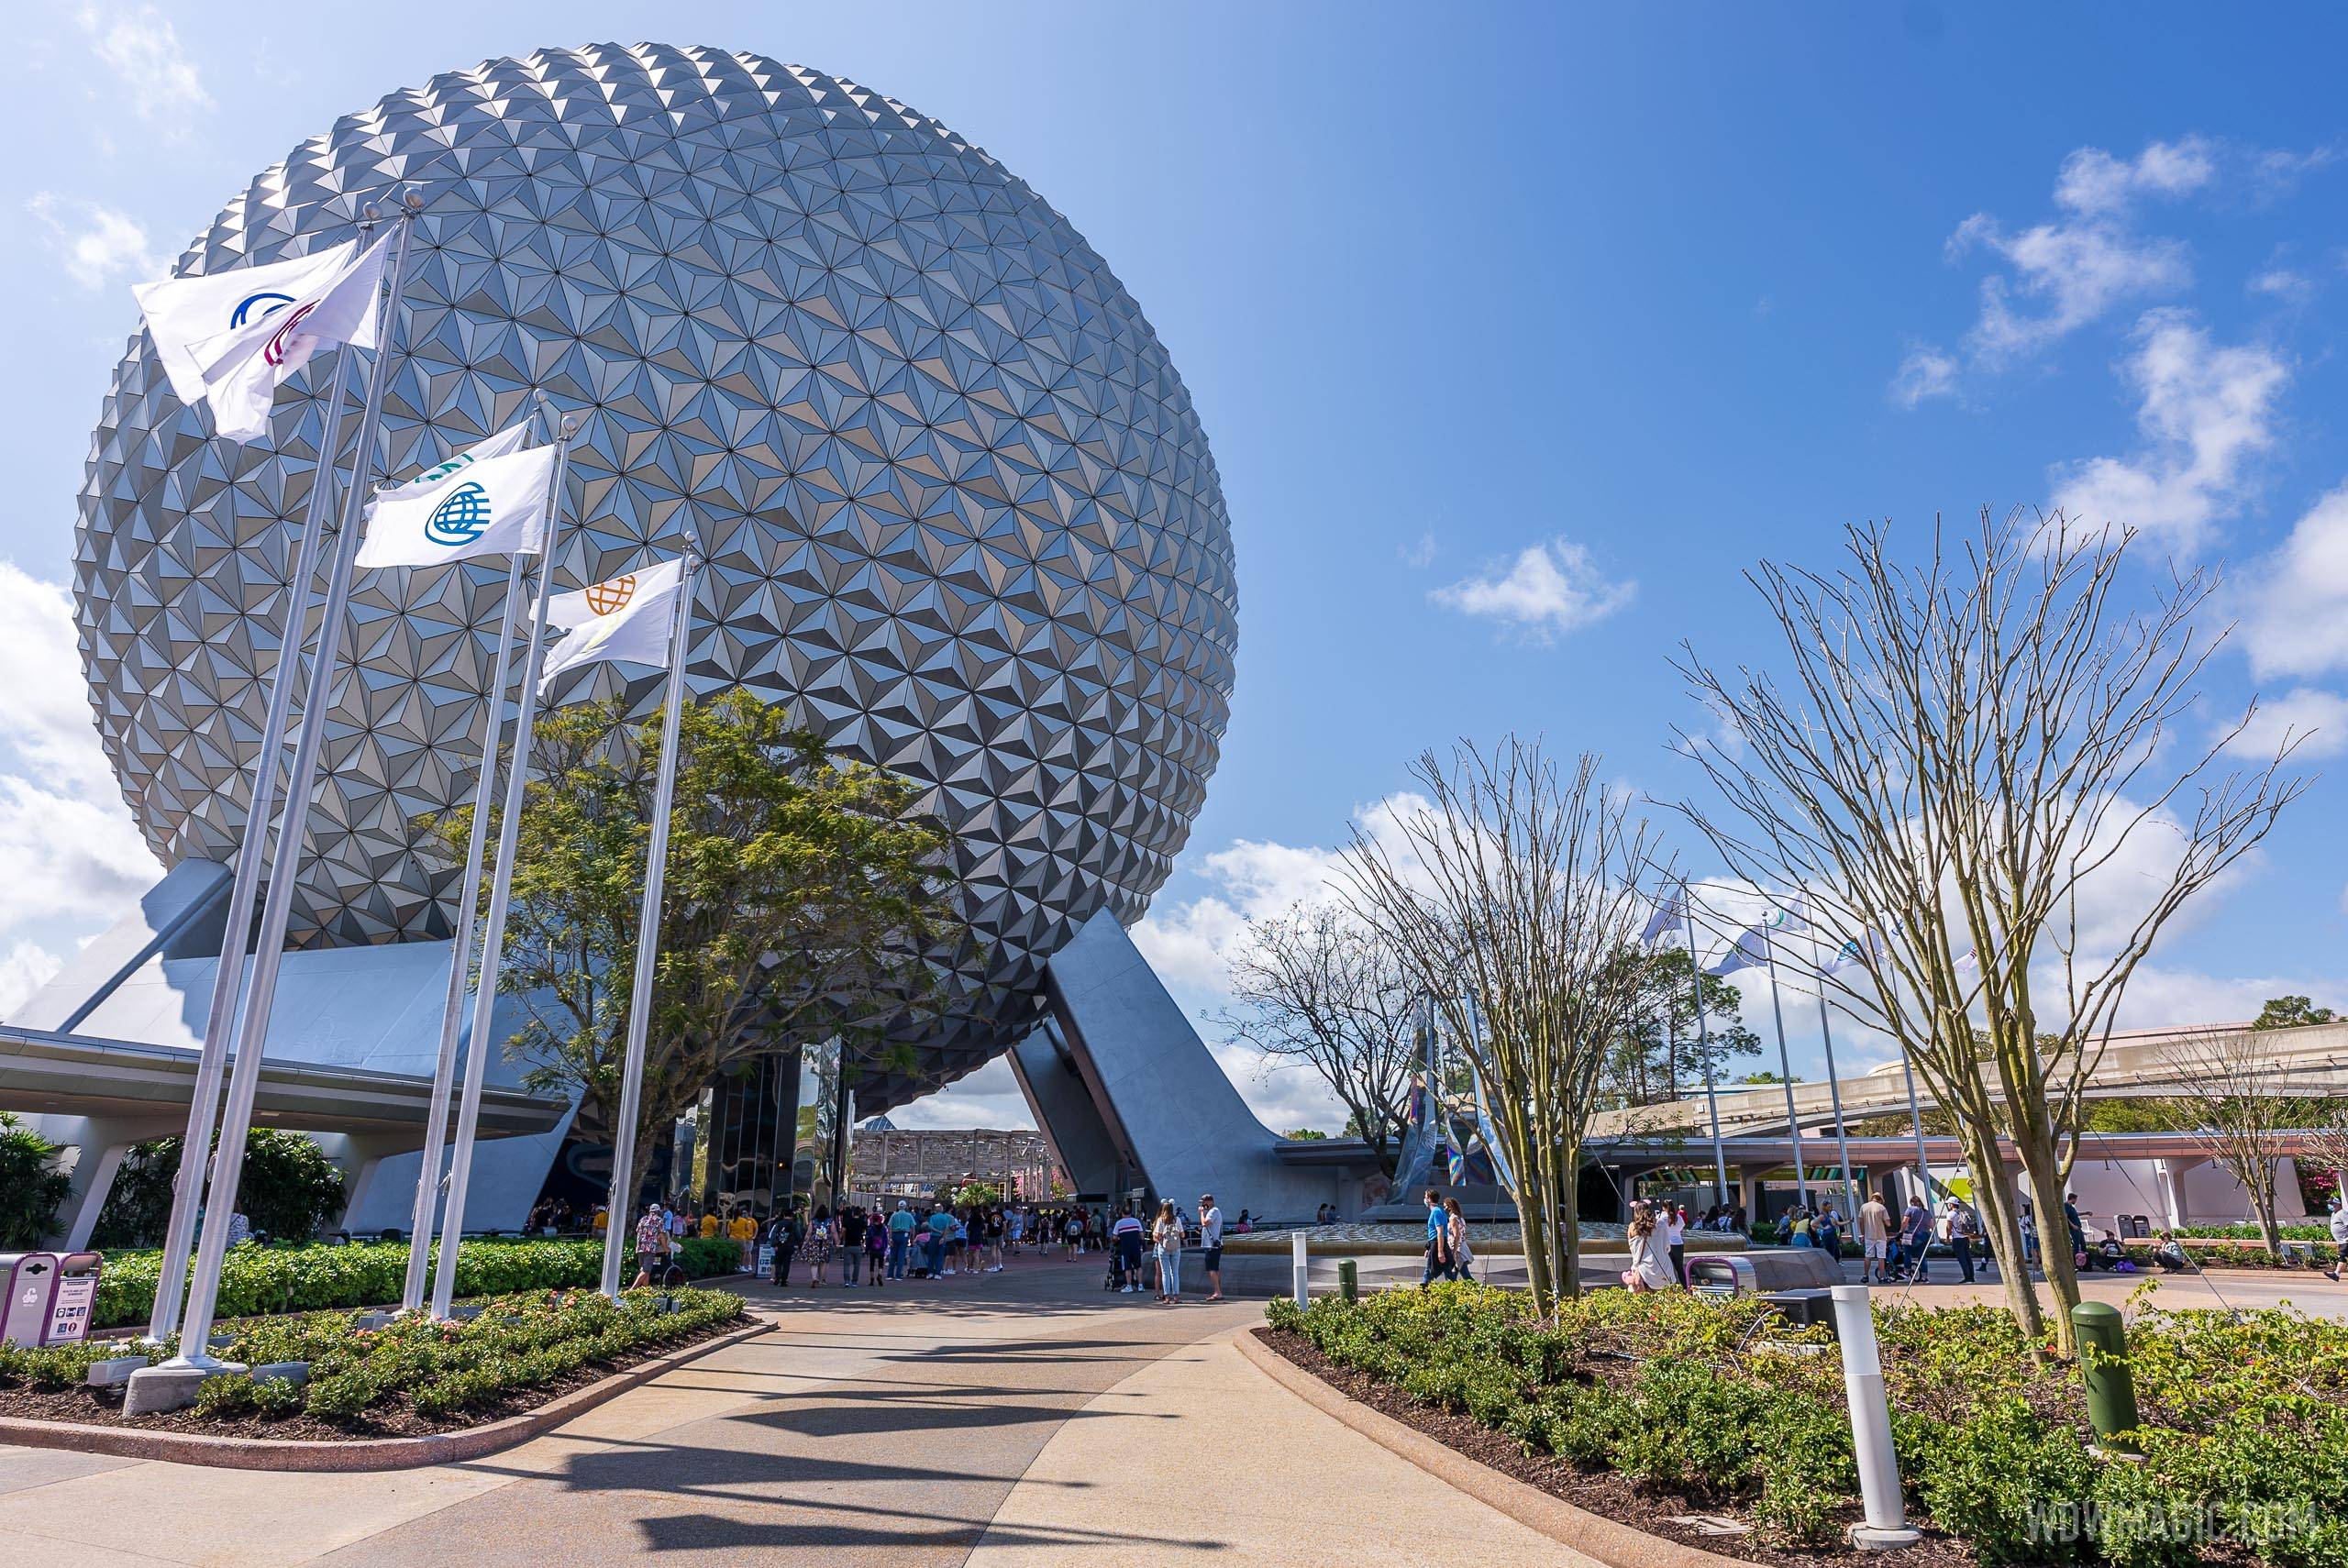 Walt Disney World is entering its busiest period since the parks reopened